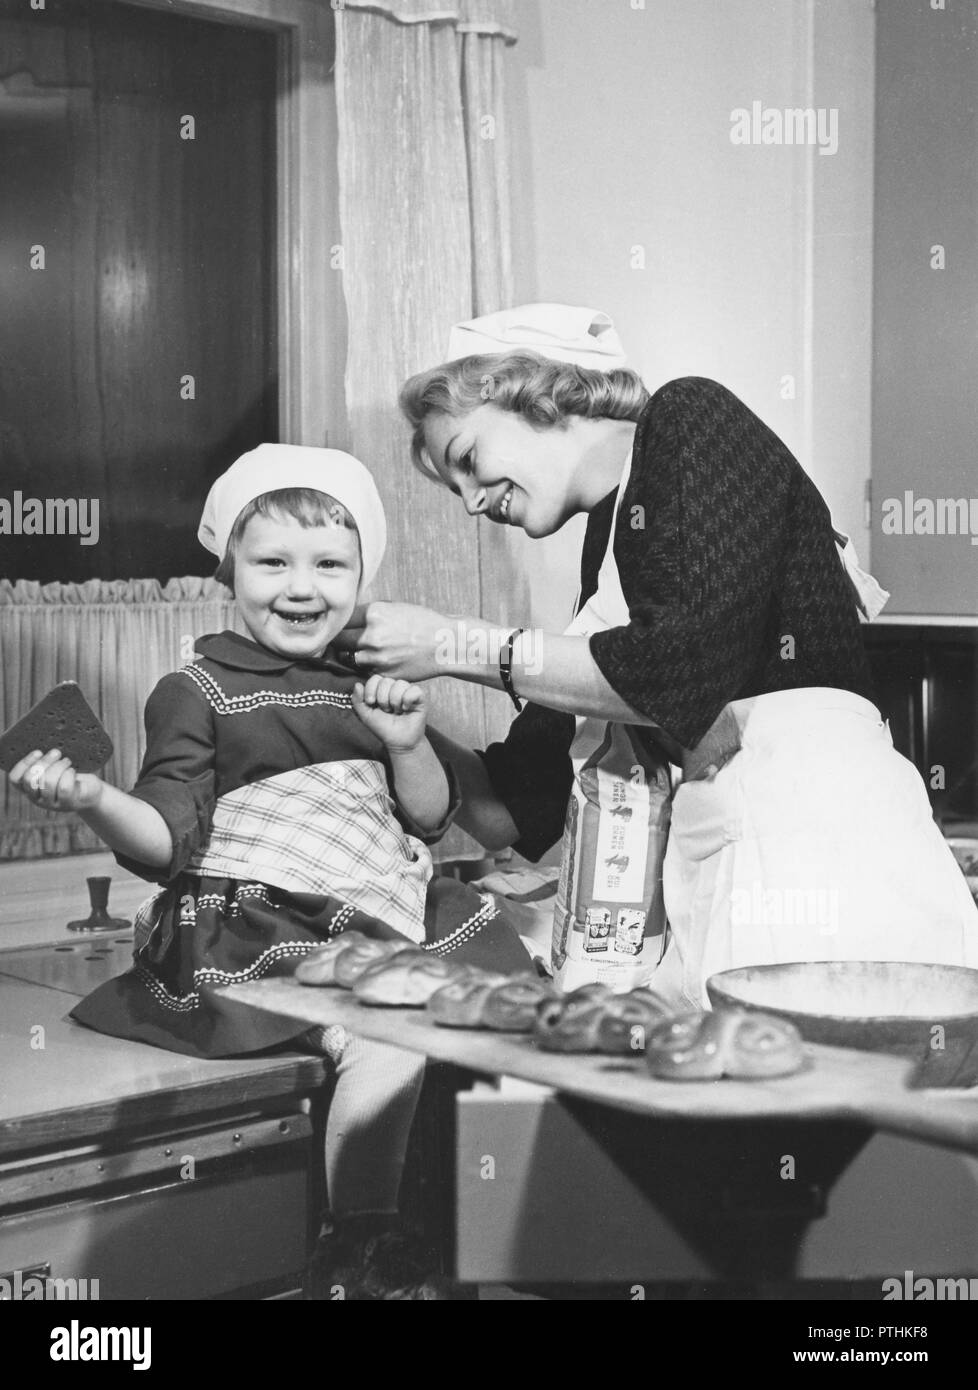 Christmas in the 1950s. Marianne Lestander who is chosen for this years Stockholms Lucia, is baking together with a small girl. Sweden 1959 Stock Photo